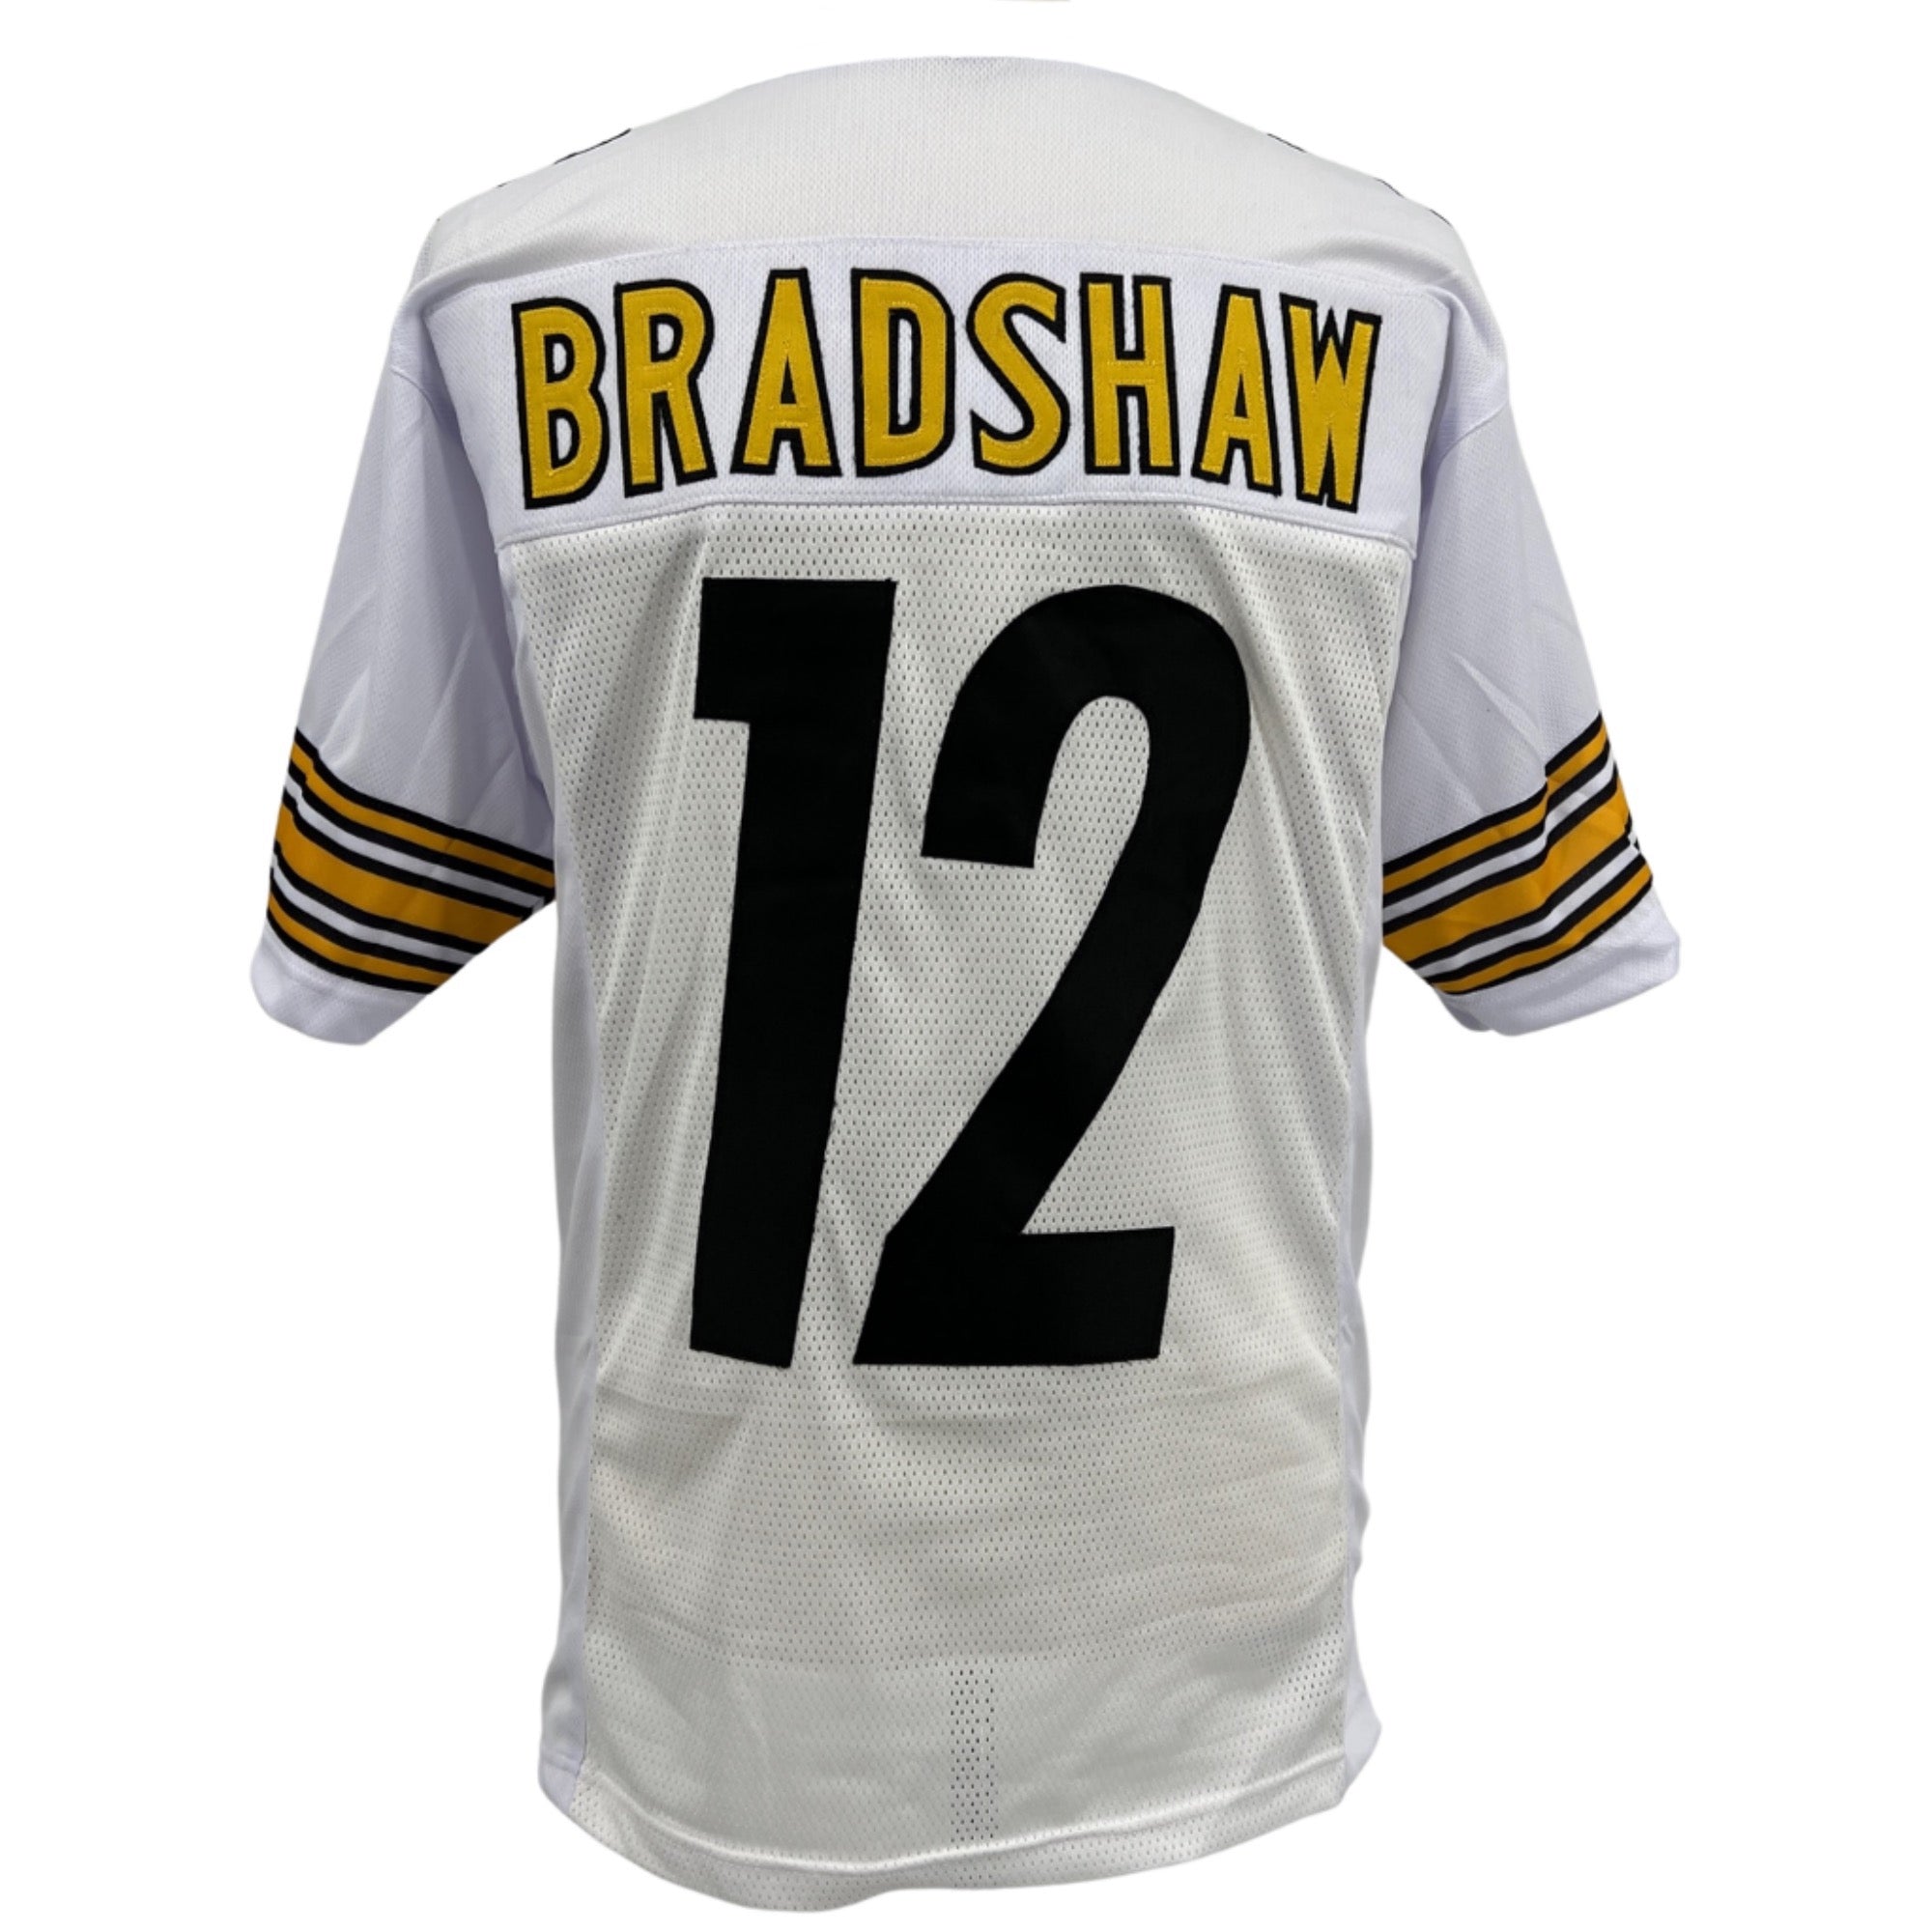 TERRY BRADSHAW Pittsburgh Steelers WHITE Jersey M-5XL Unsigned Sewn Stitched